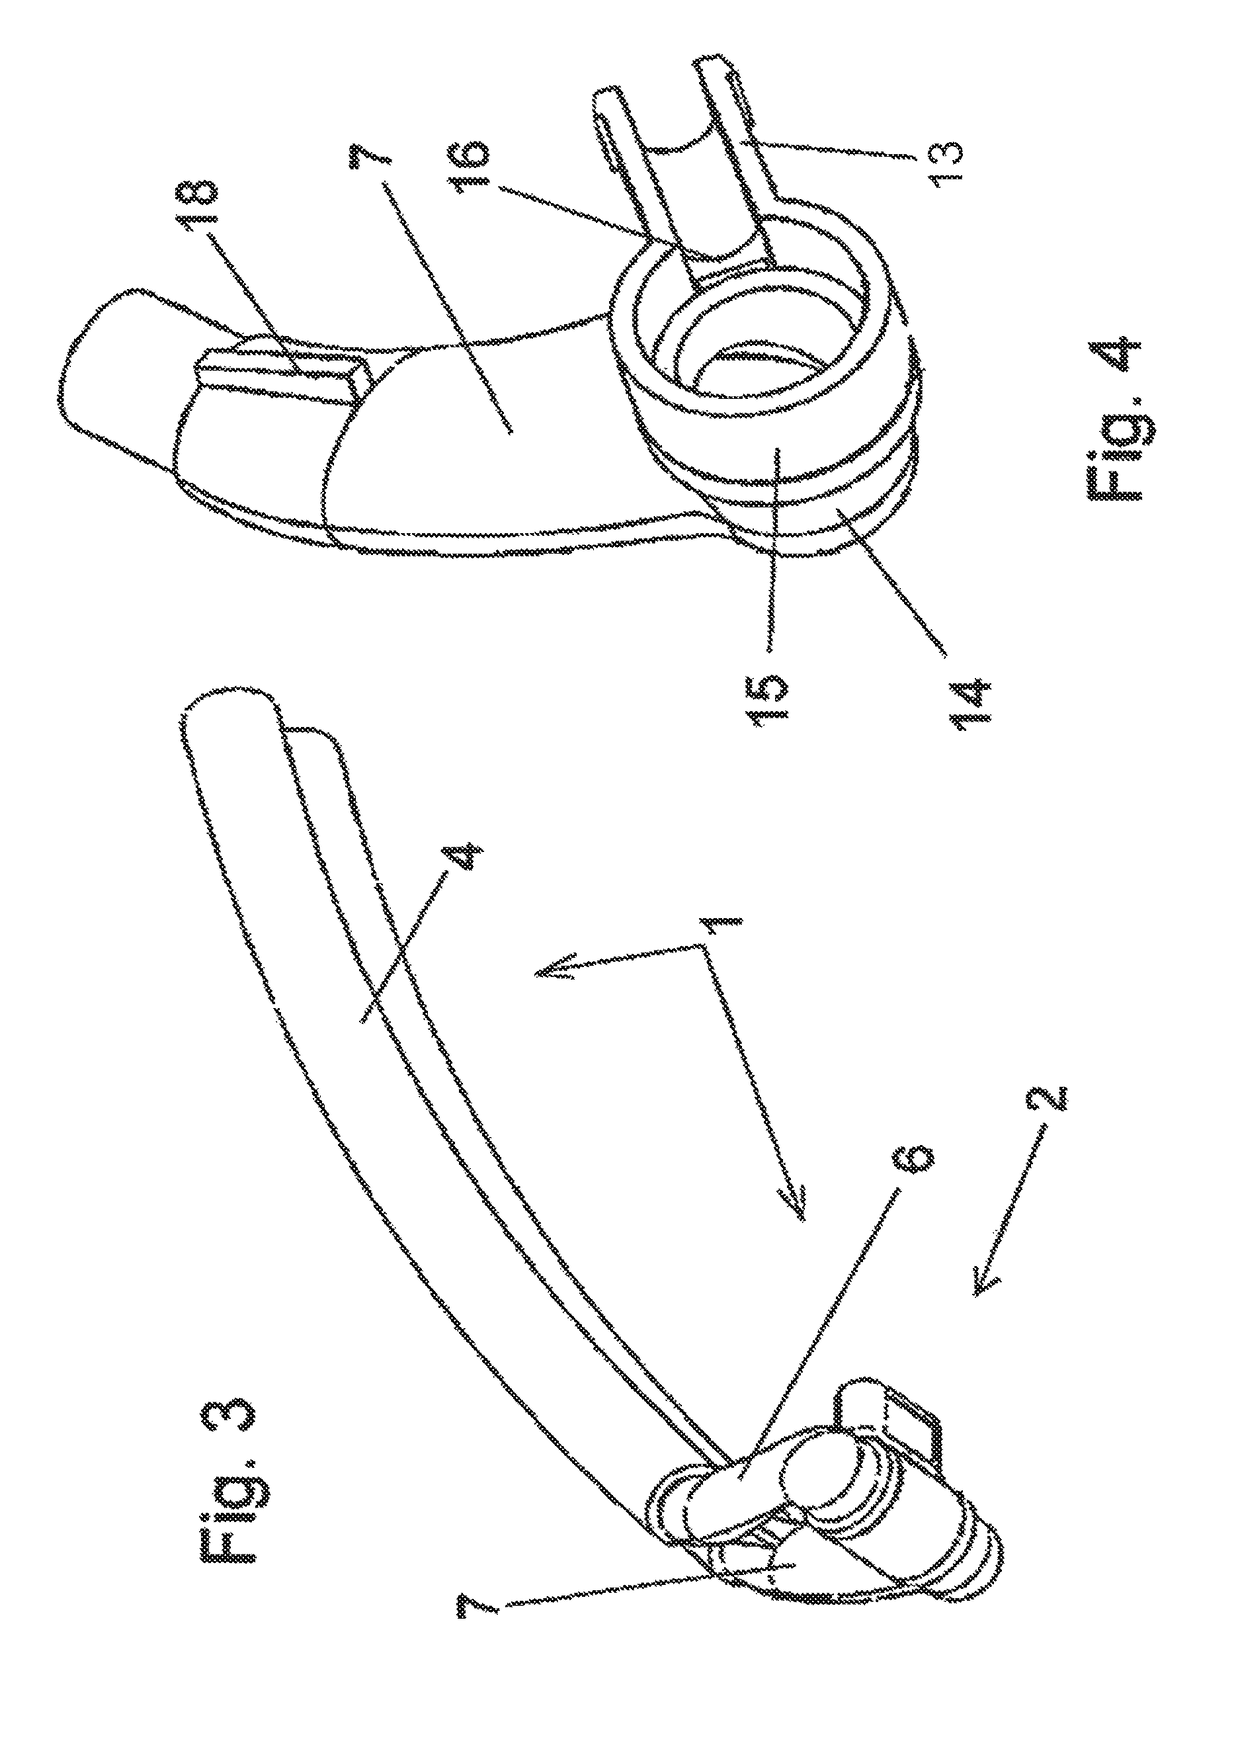 Nasal adapter system for CPAP respiration